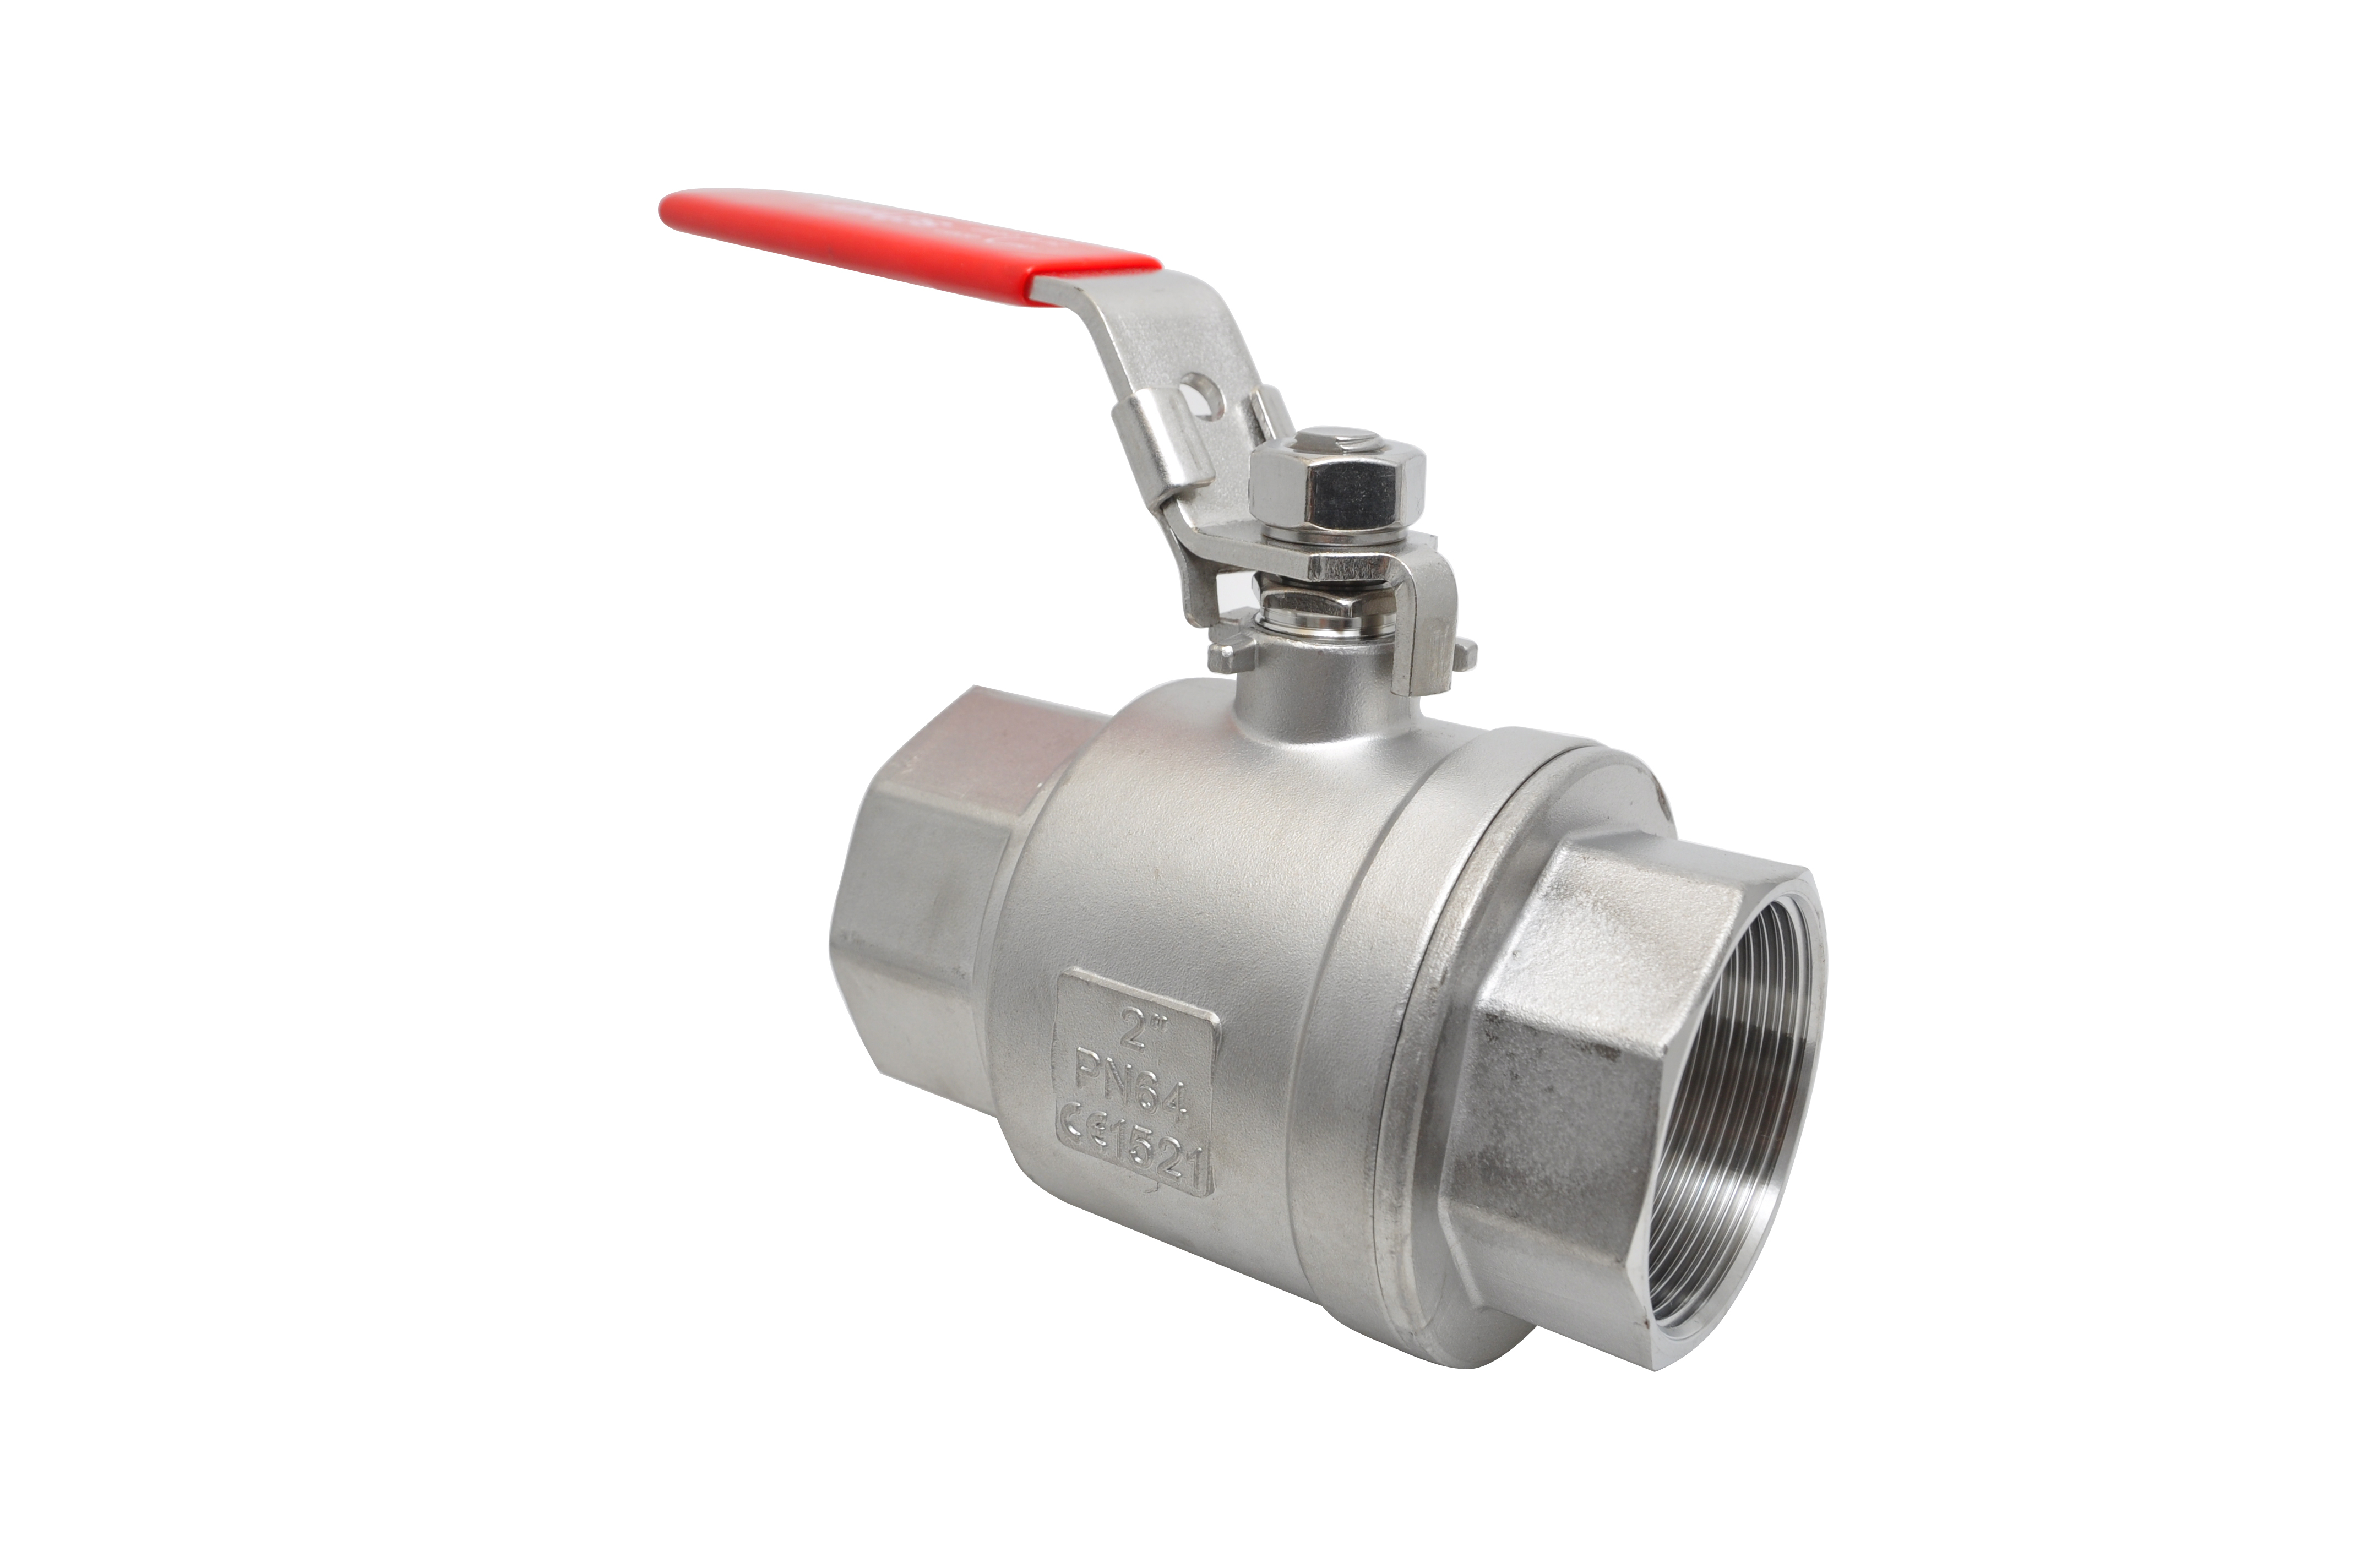 Ball valve 2" 2xIW for standpipe, stainless steel